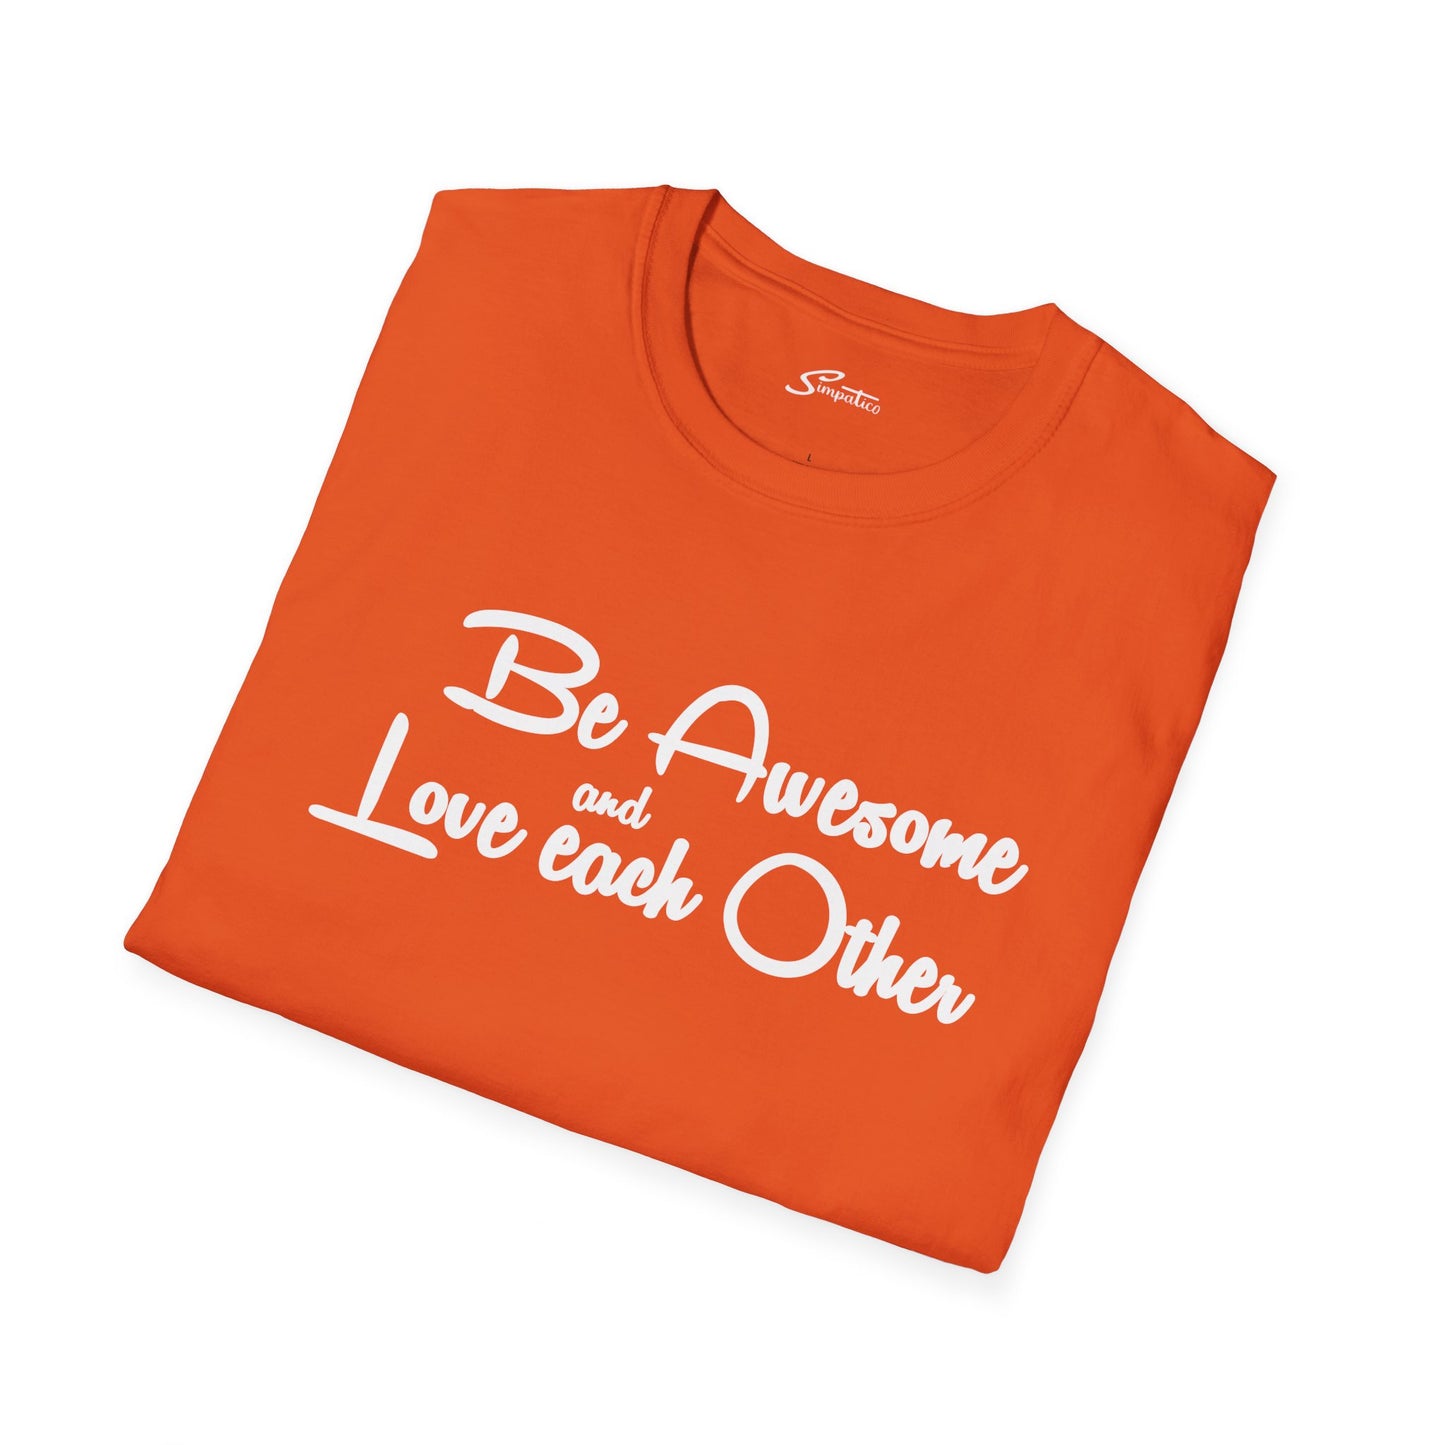 Be Awesome and Love Each Other- Holcomb T-Shirt